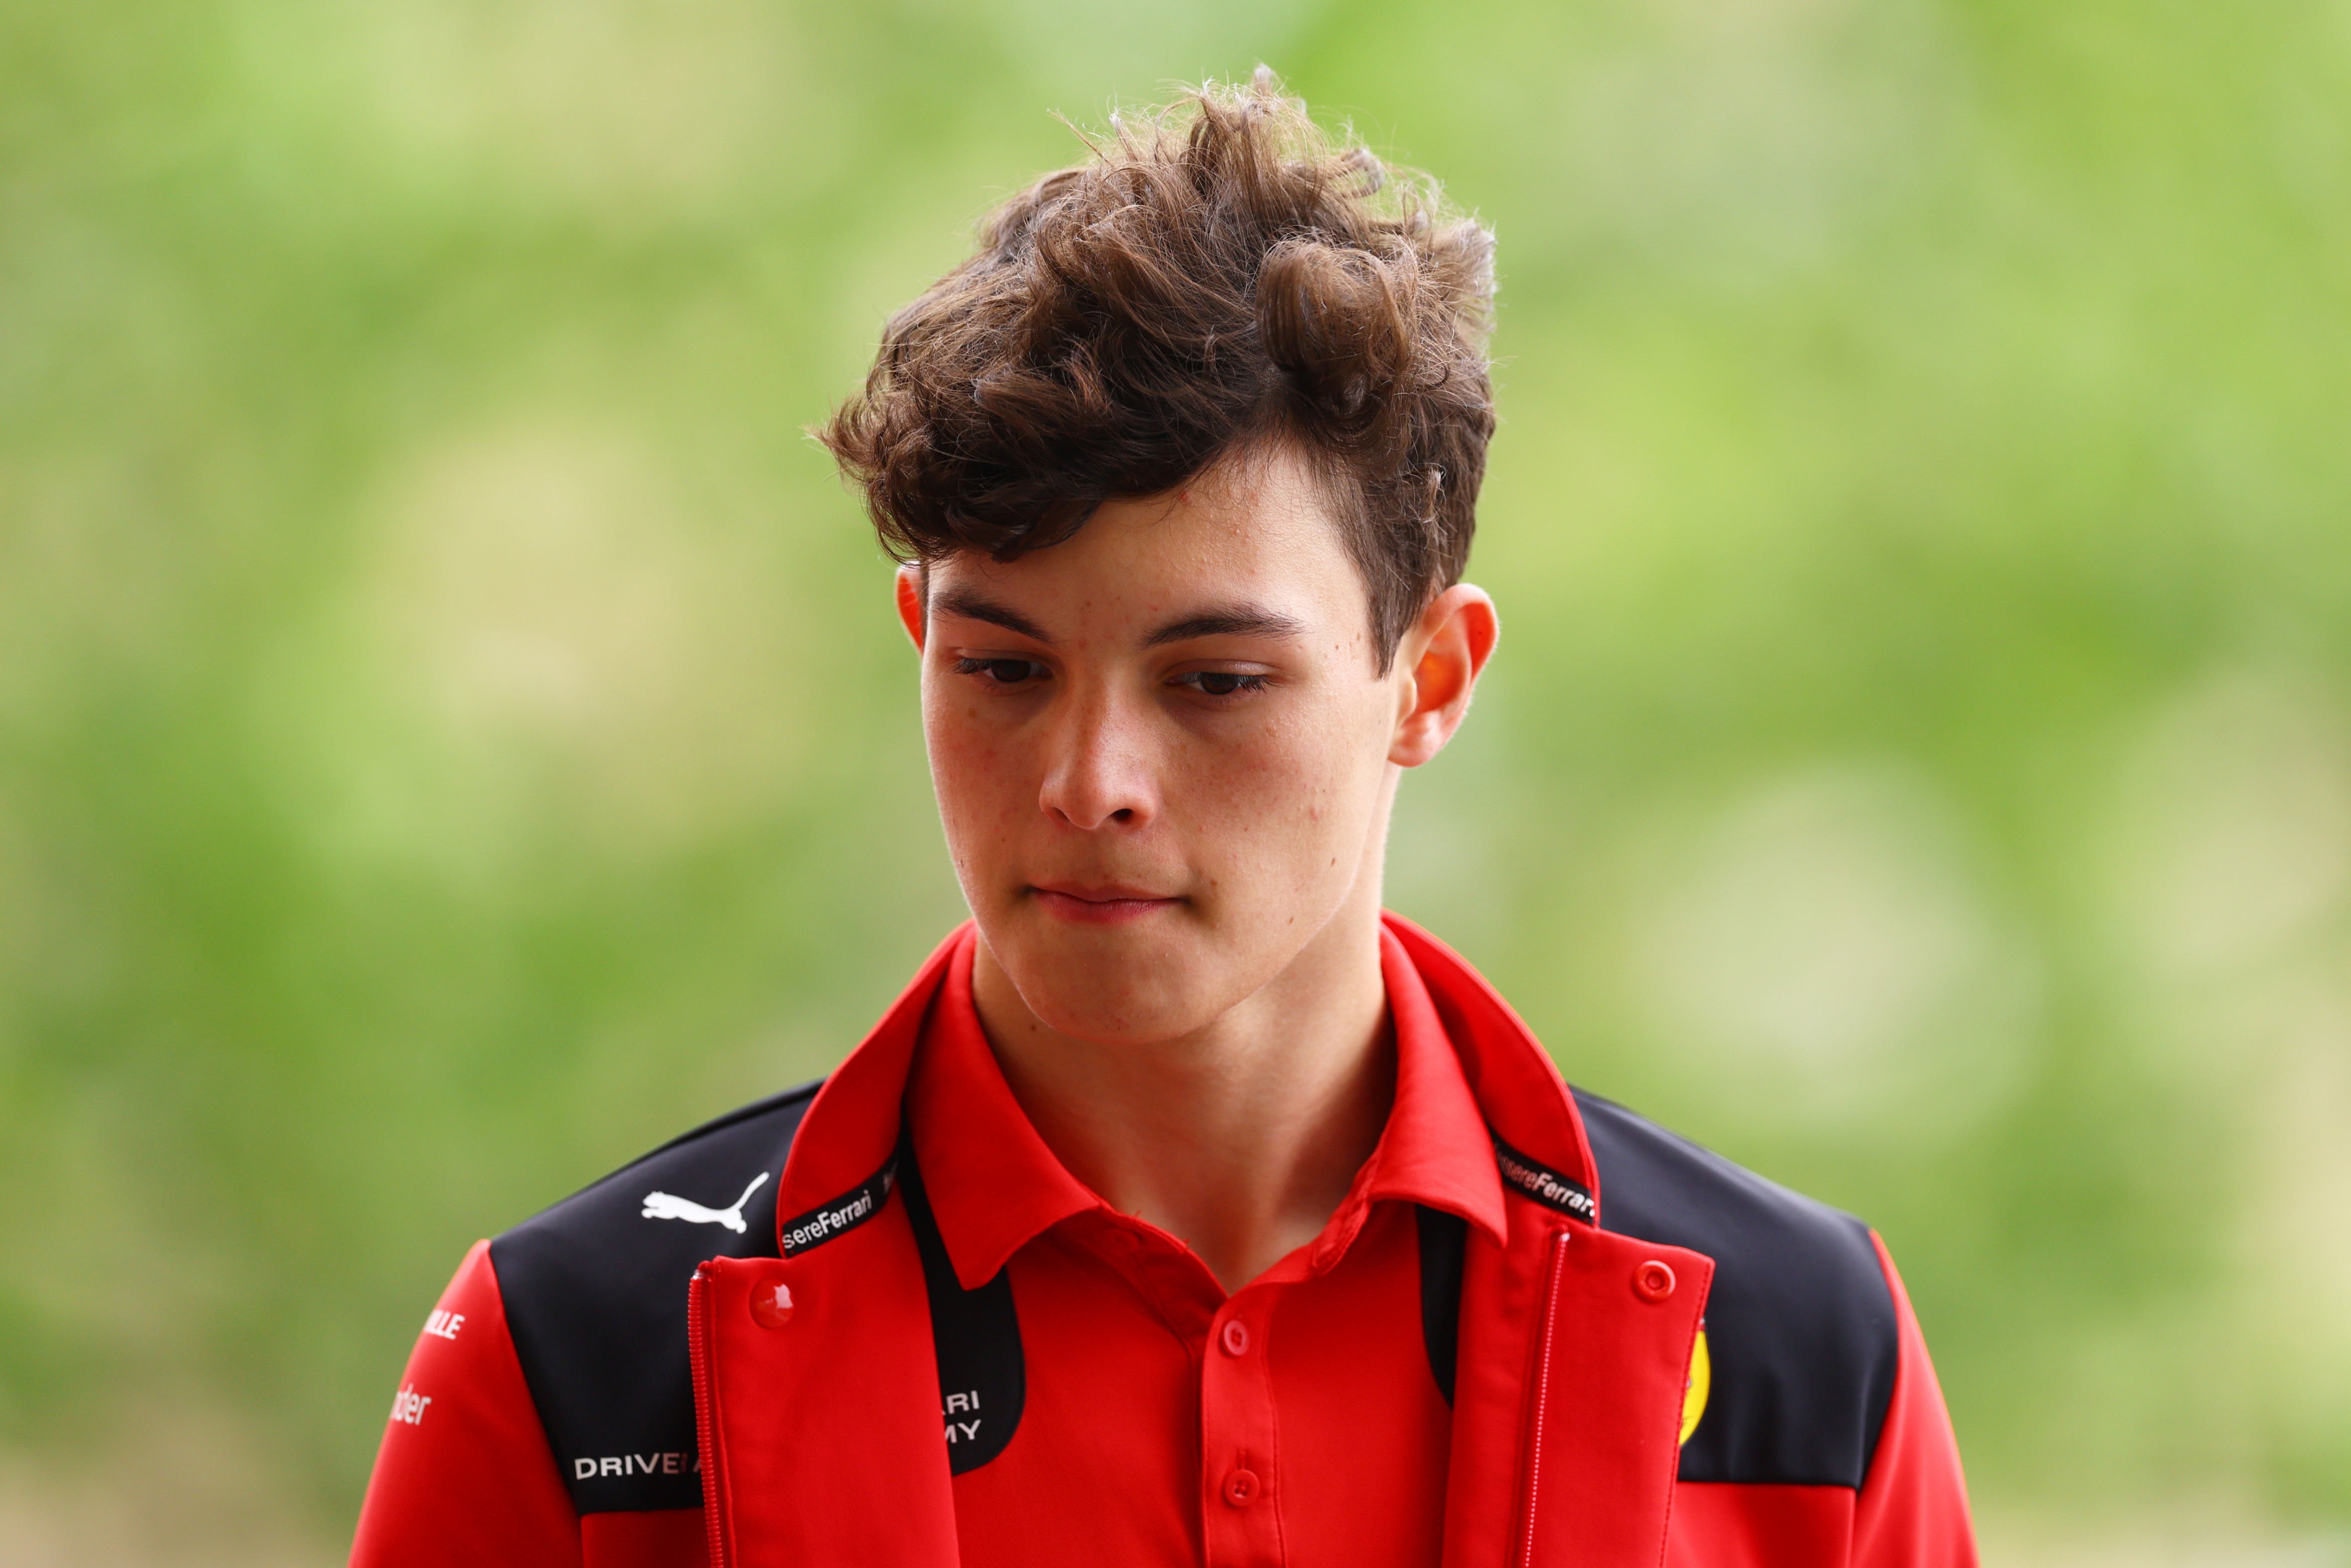 Ollie Bearman has been named as a reserve driver for Ferrari this year